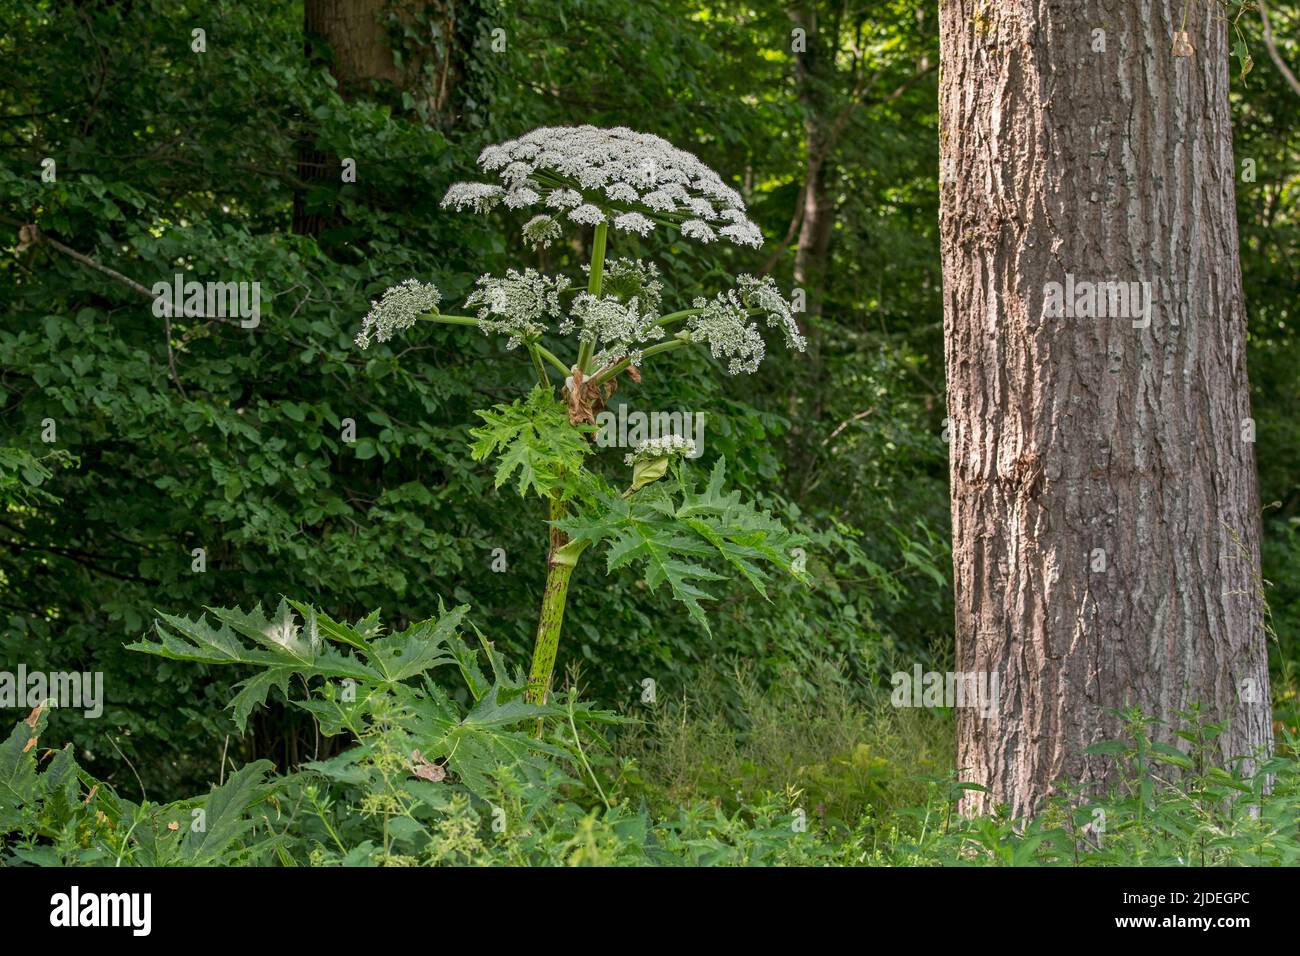 Giant hogweed / cartwheel-flower / giant cow parsley / giant cow parsnip / hogsbane (Heracleum mantegazzianum) in flower at forest's edge Stock Photo